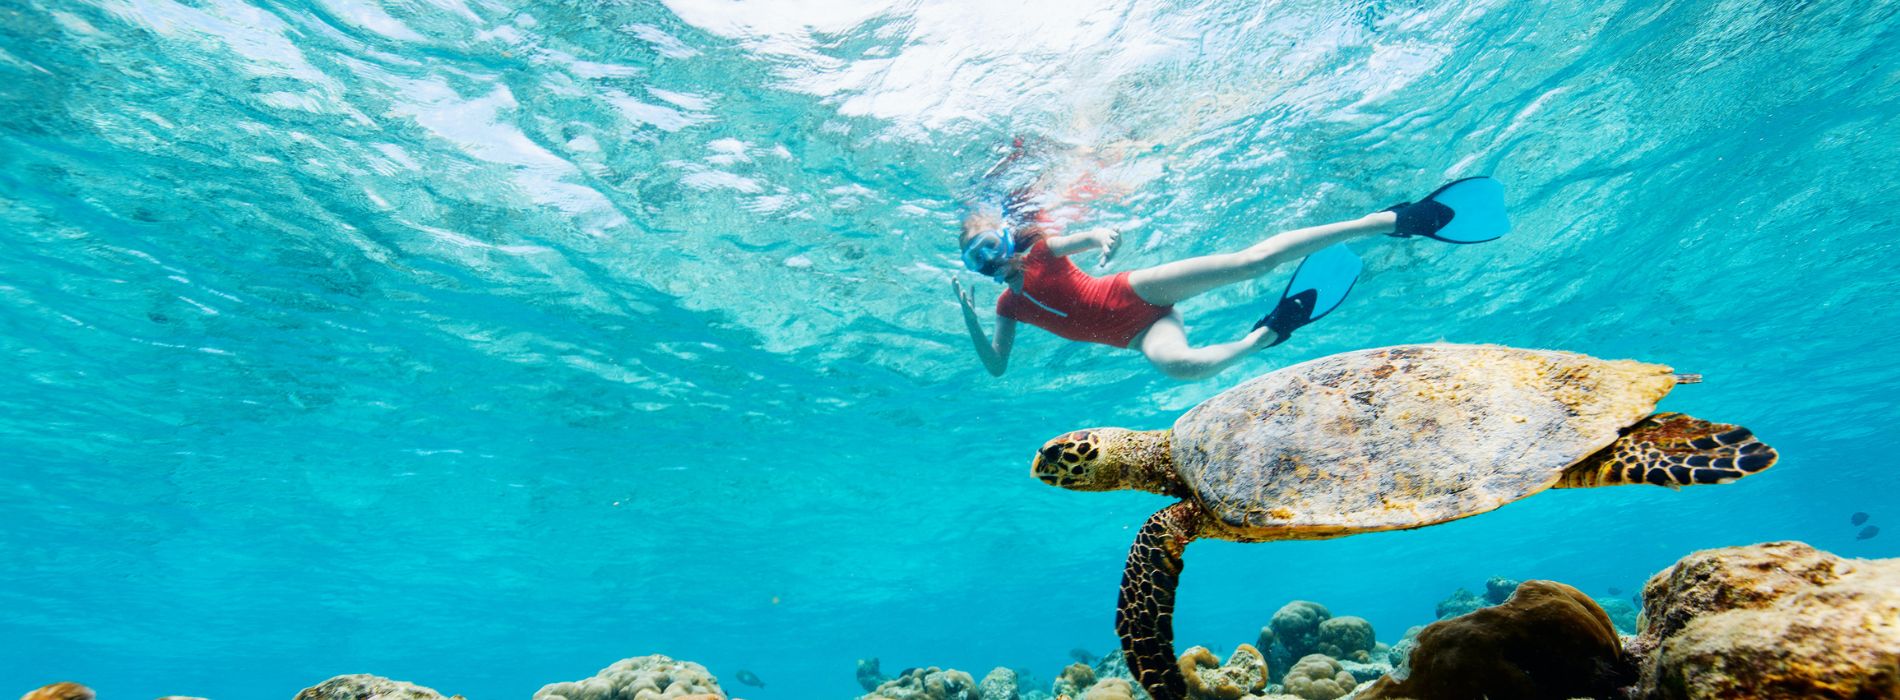 Snorkeling with Sea Turtles in Oahu - A Magical Encounter - Madeinsea©